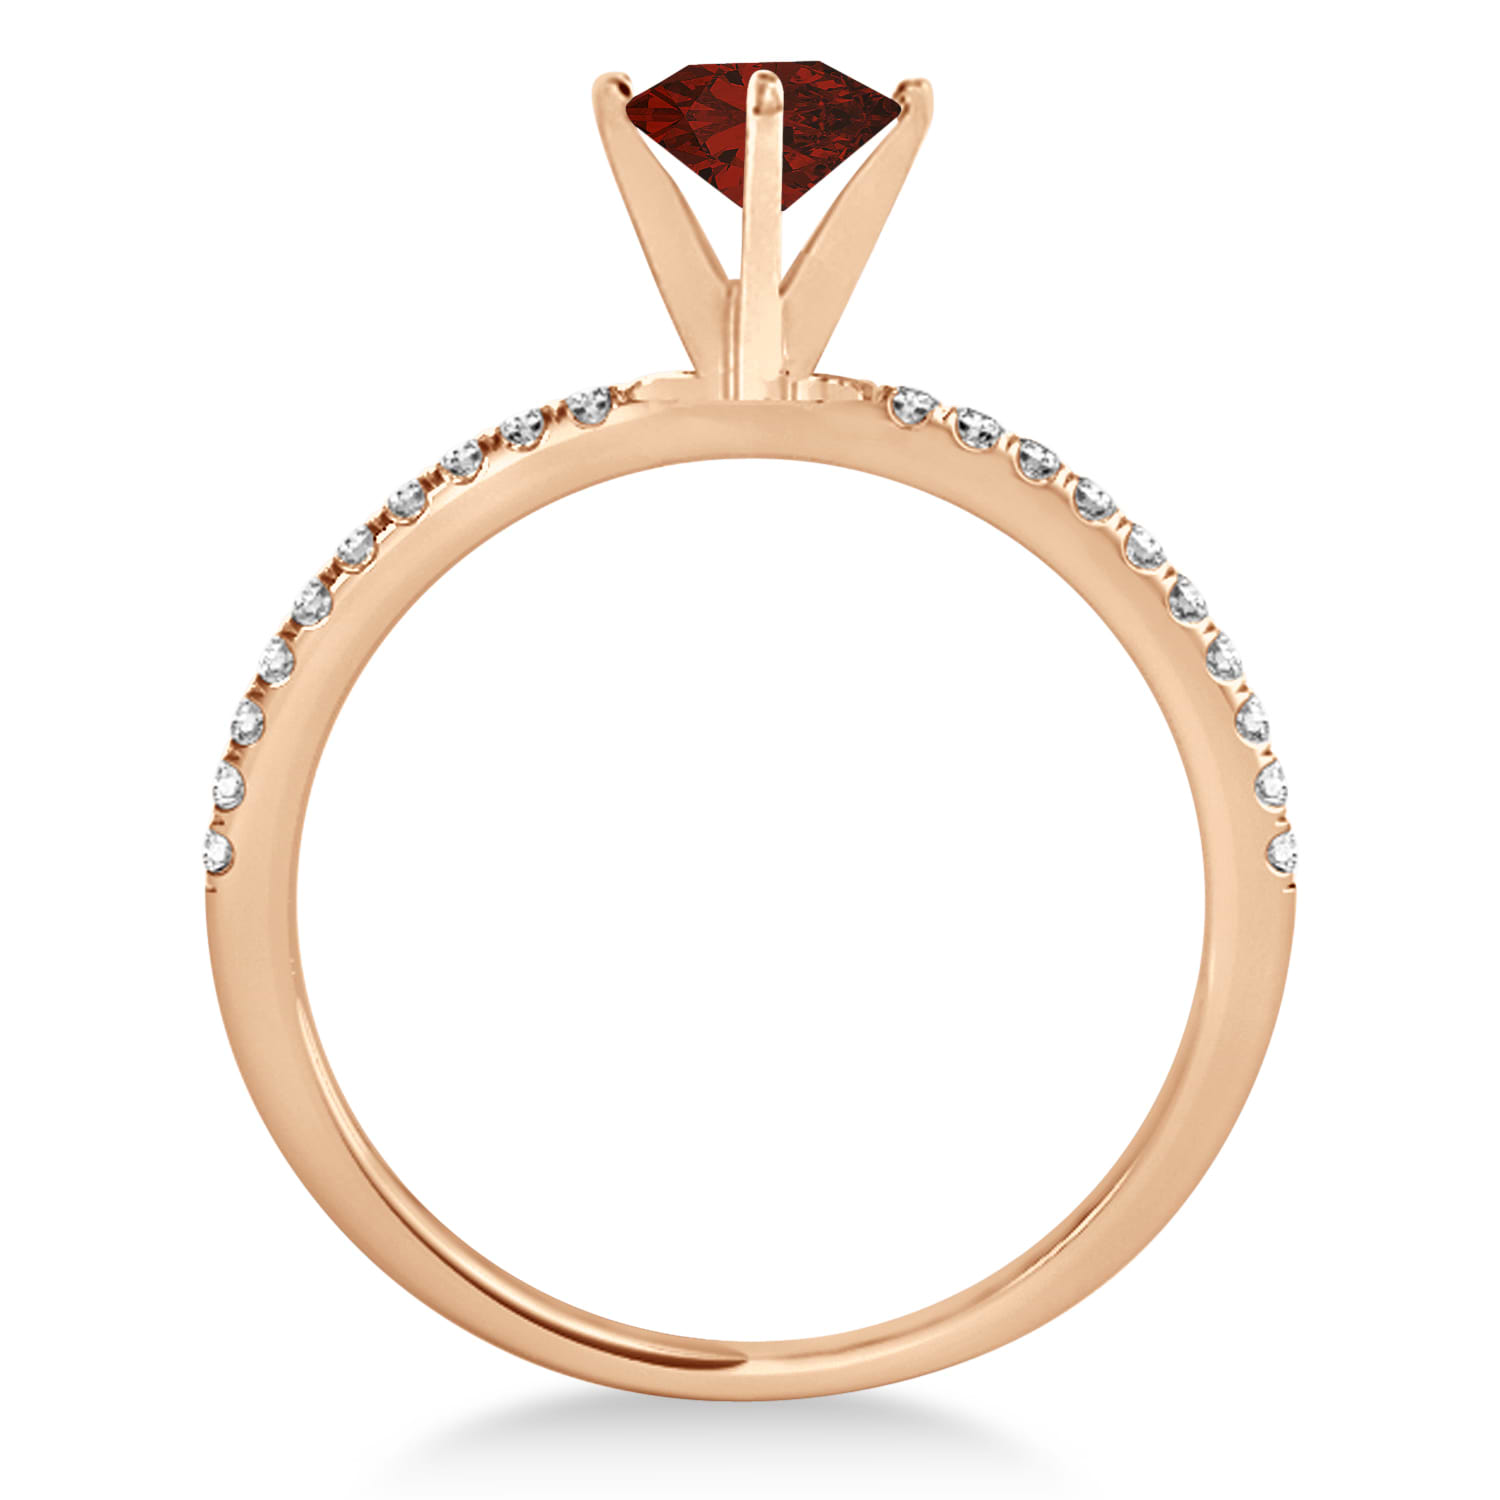 Garnet & Diamond Accented Oval Shape Engagement Ring 14k Rose Gold (2.50ct)